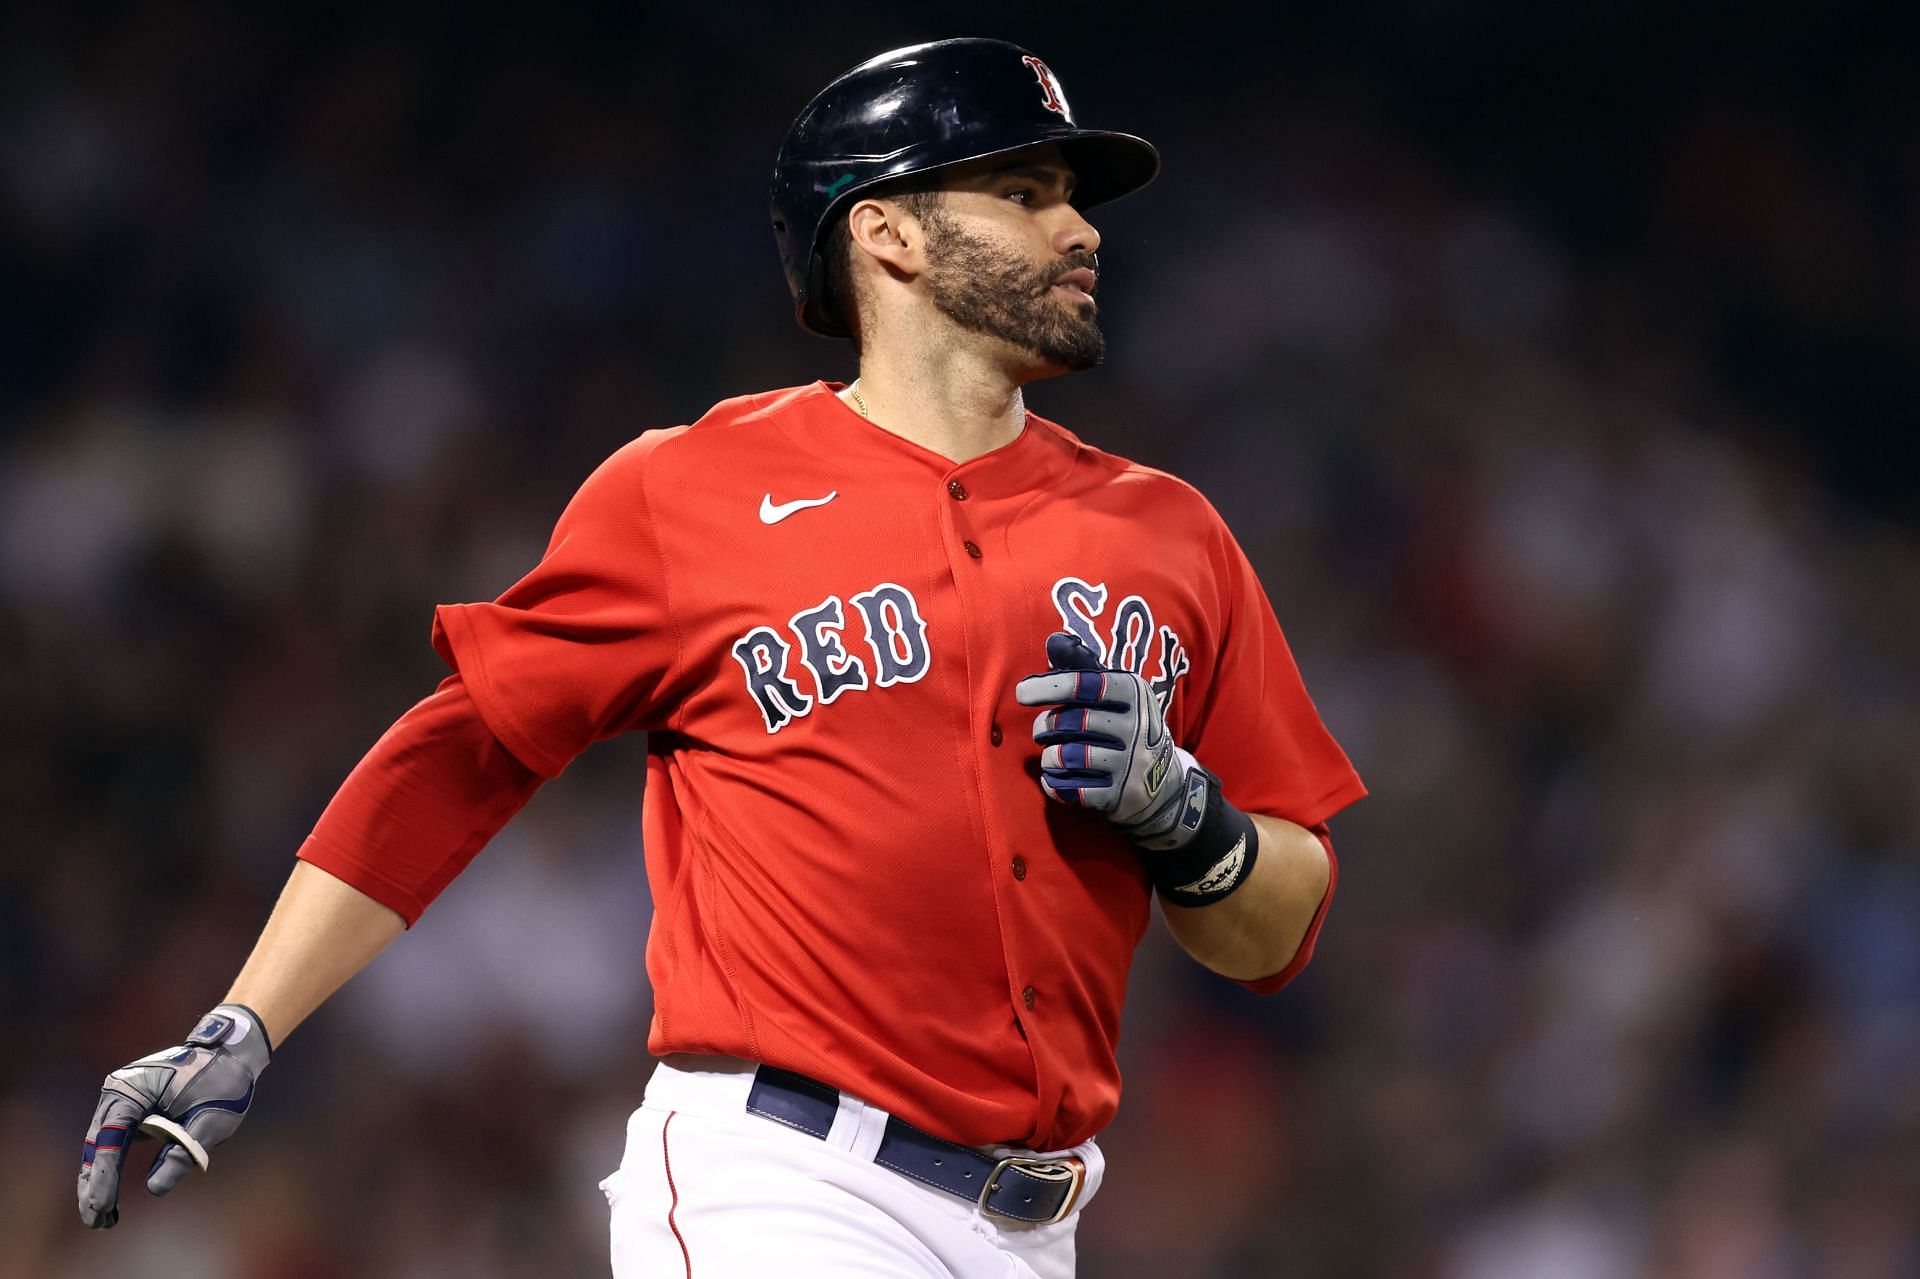 Oofos Signs J.D. Martinez of the Los Angeles Dodgers – Footwear News